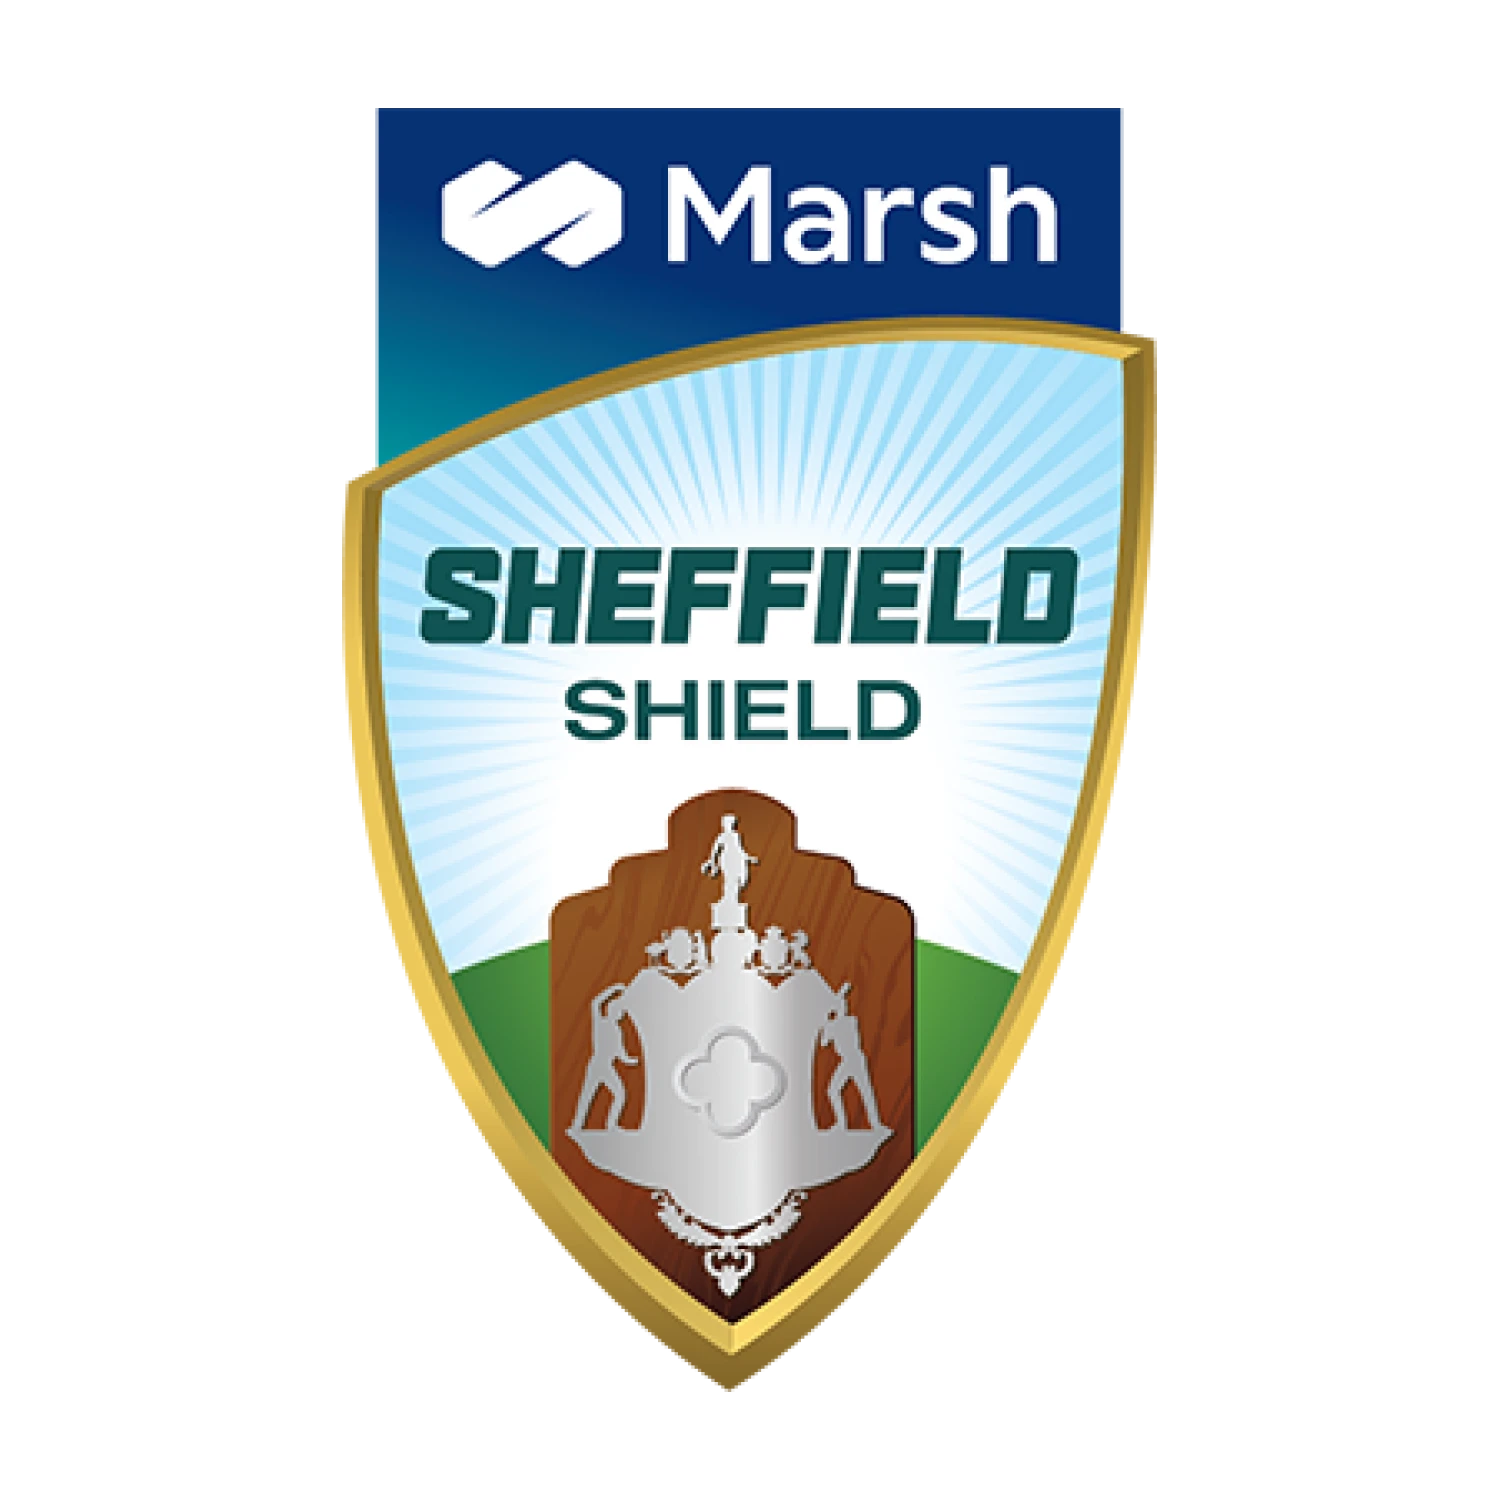 Find more information about Sheffield Shield on our website.